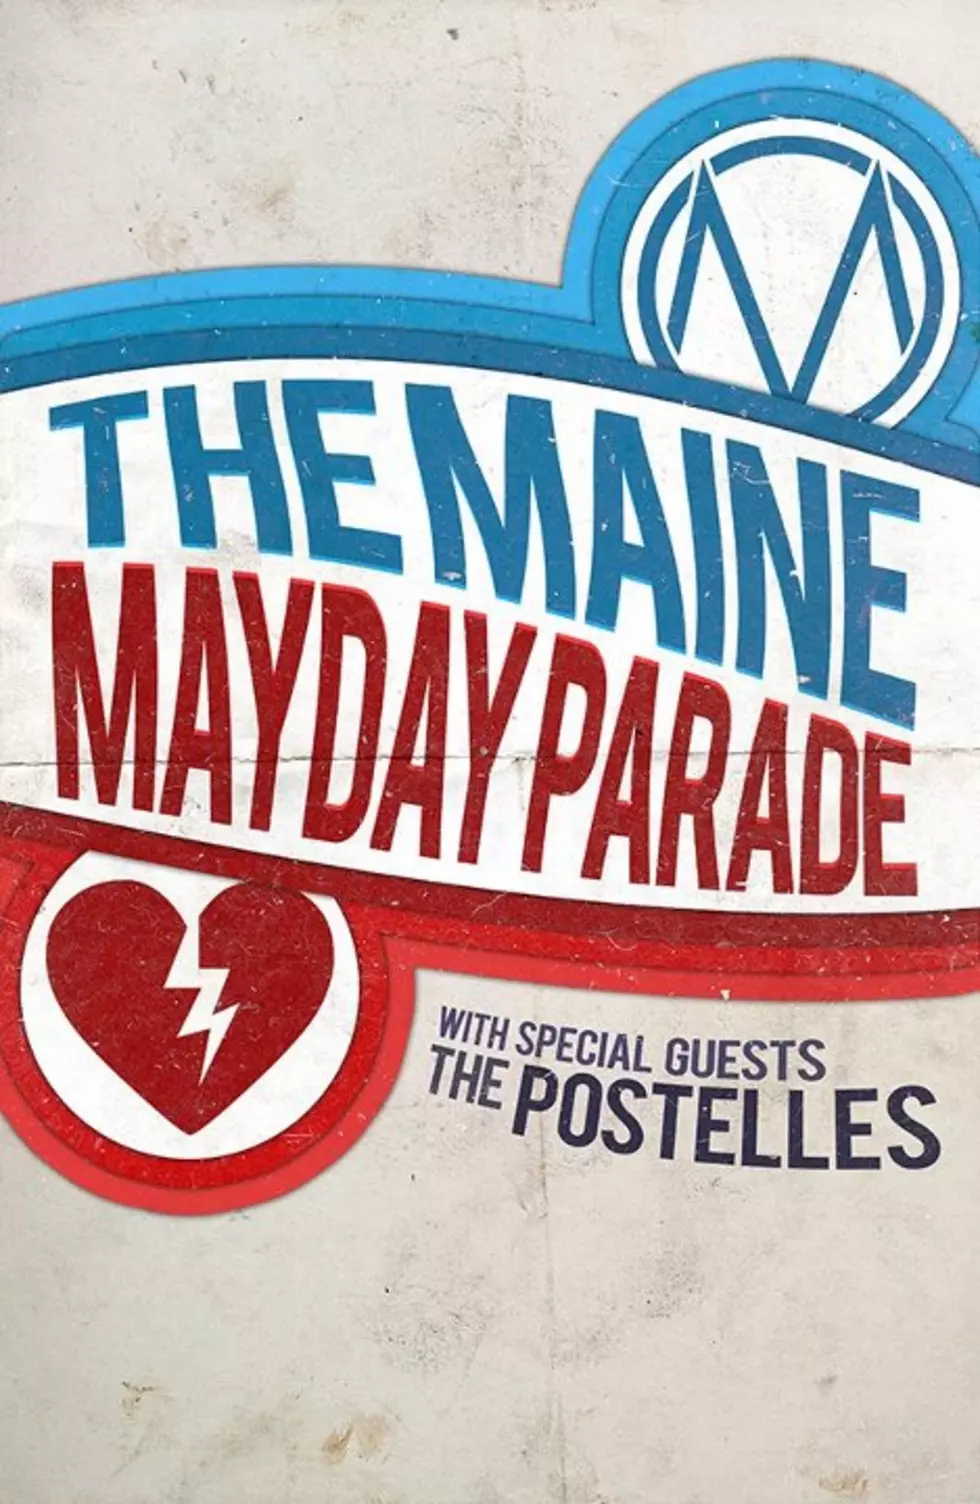 The Maine, Mayday Parade and the Postelles tour dates revealed